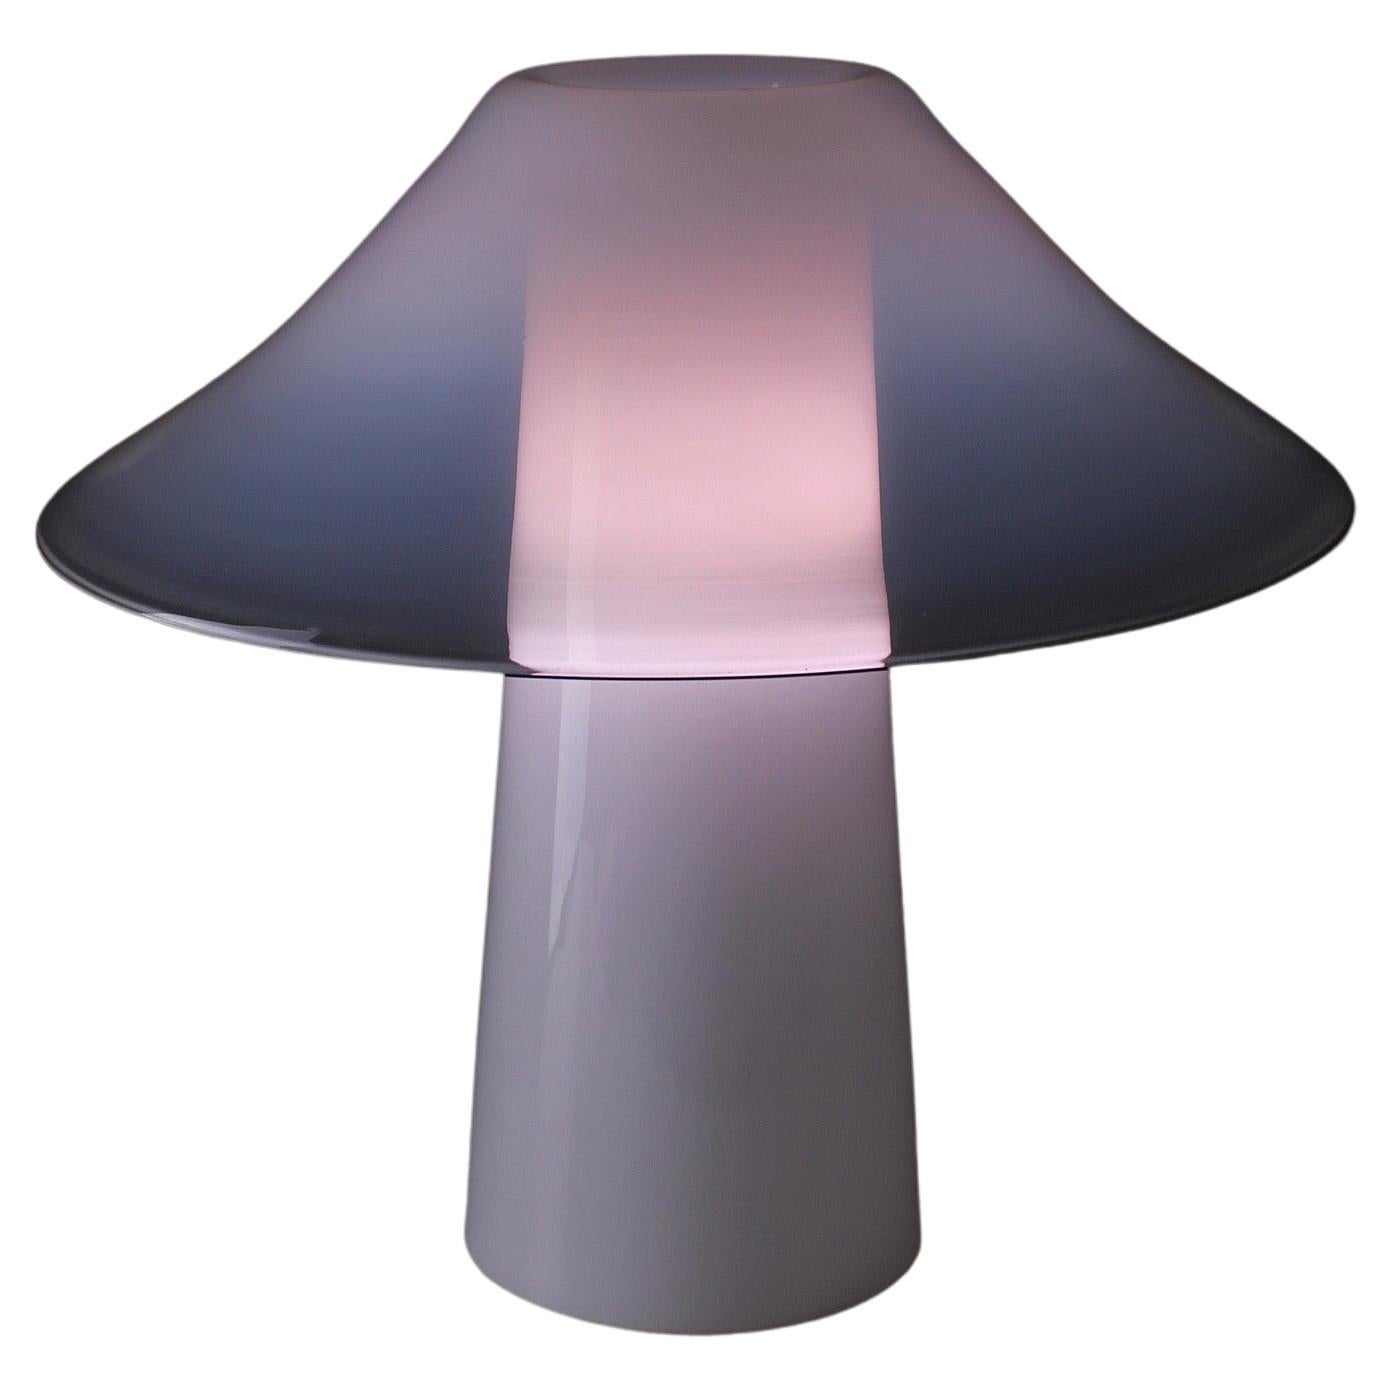 Vulcano table lamp by Mauro Marzollo for ITRE, 1980s